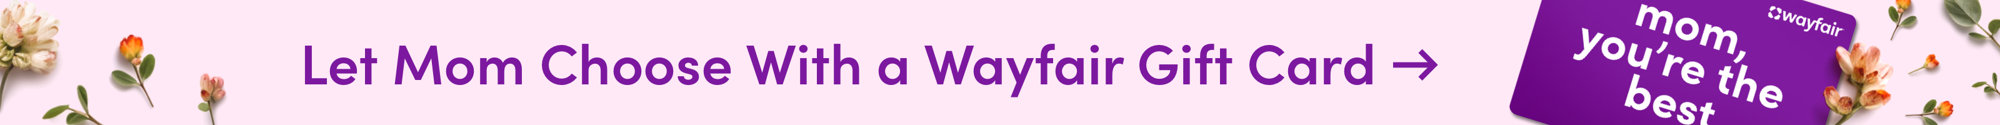 Let Mom Choose With a Wayfair Gift Card. 